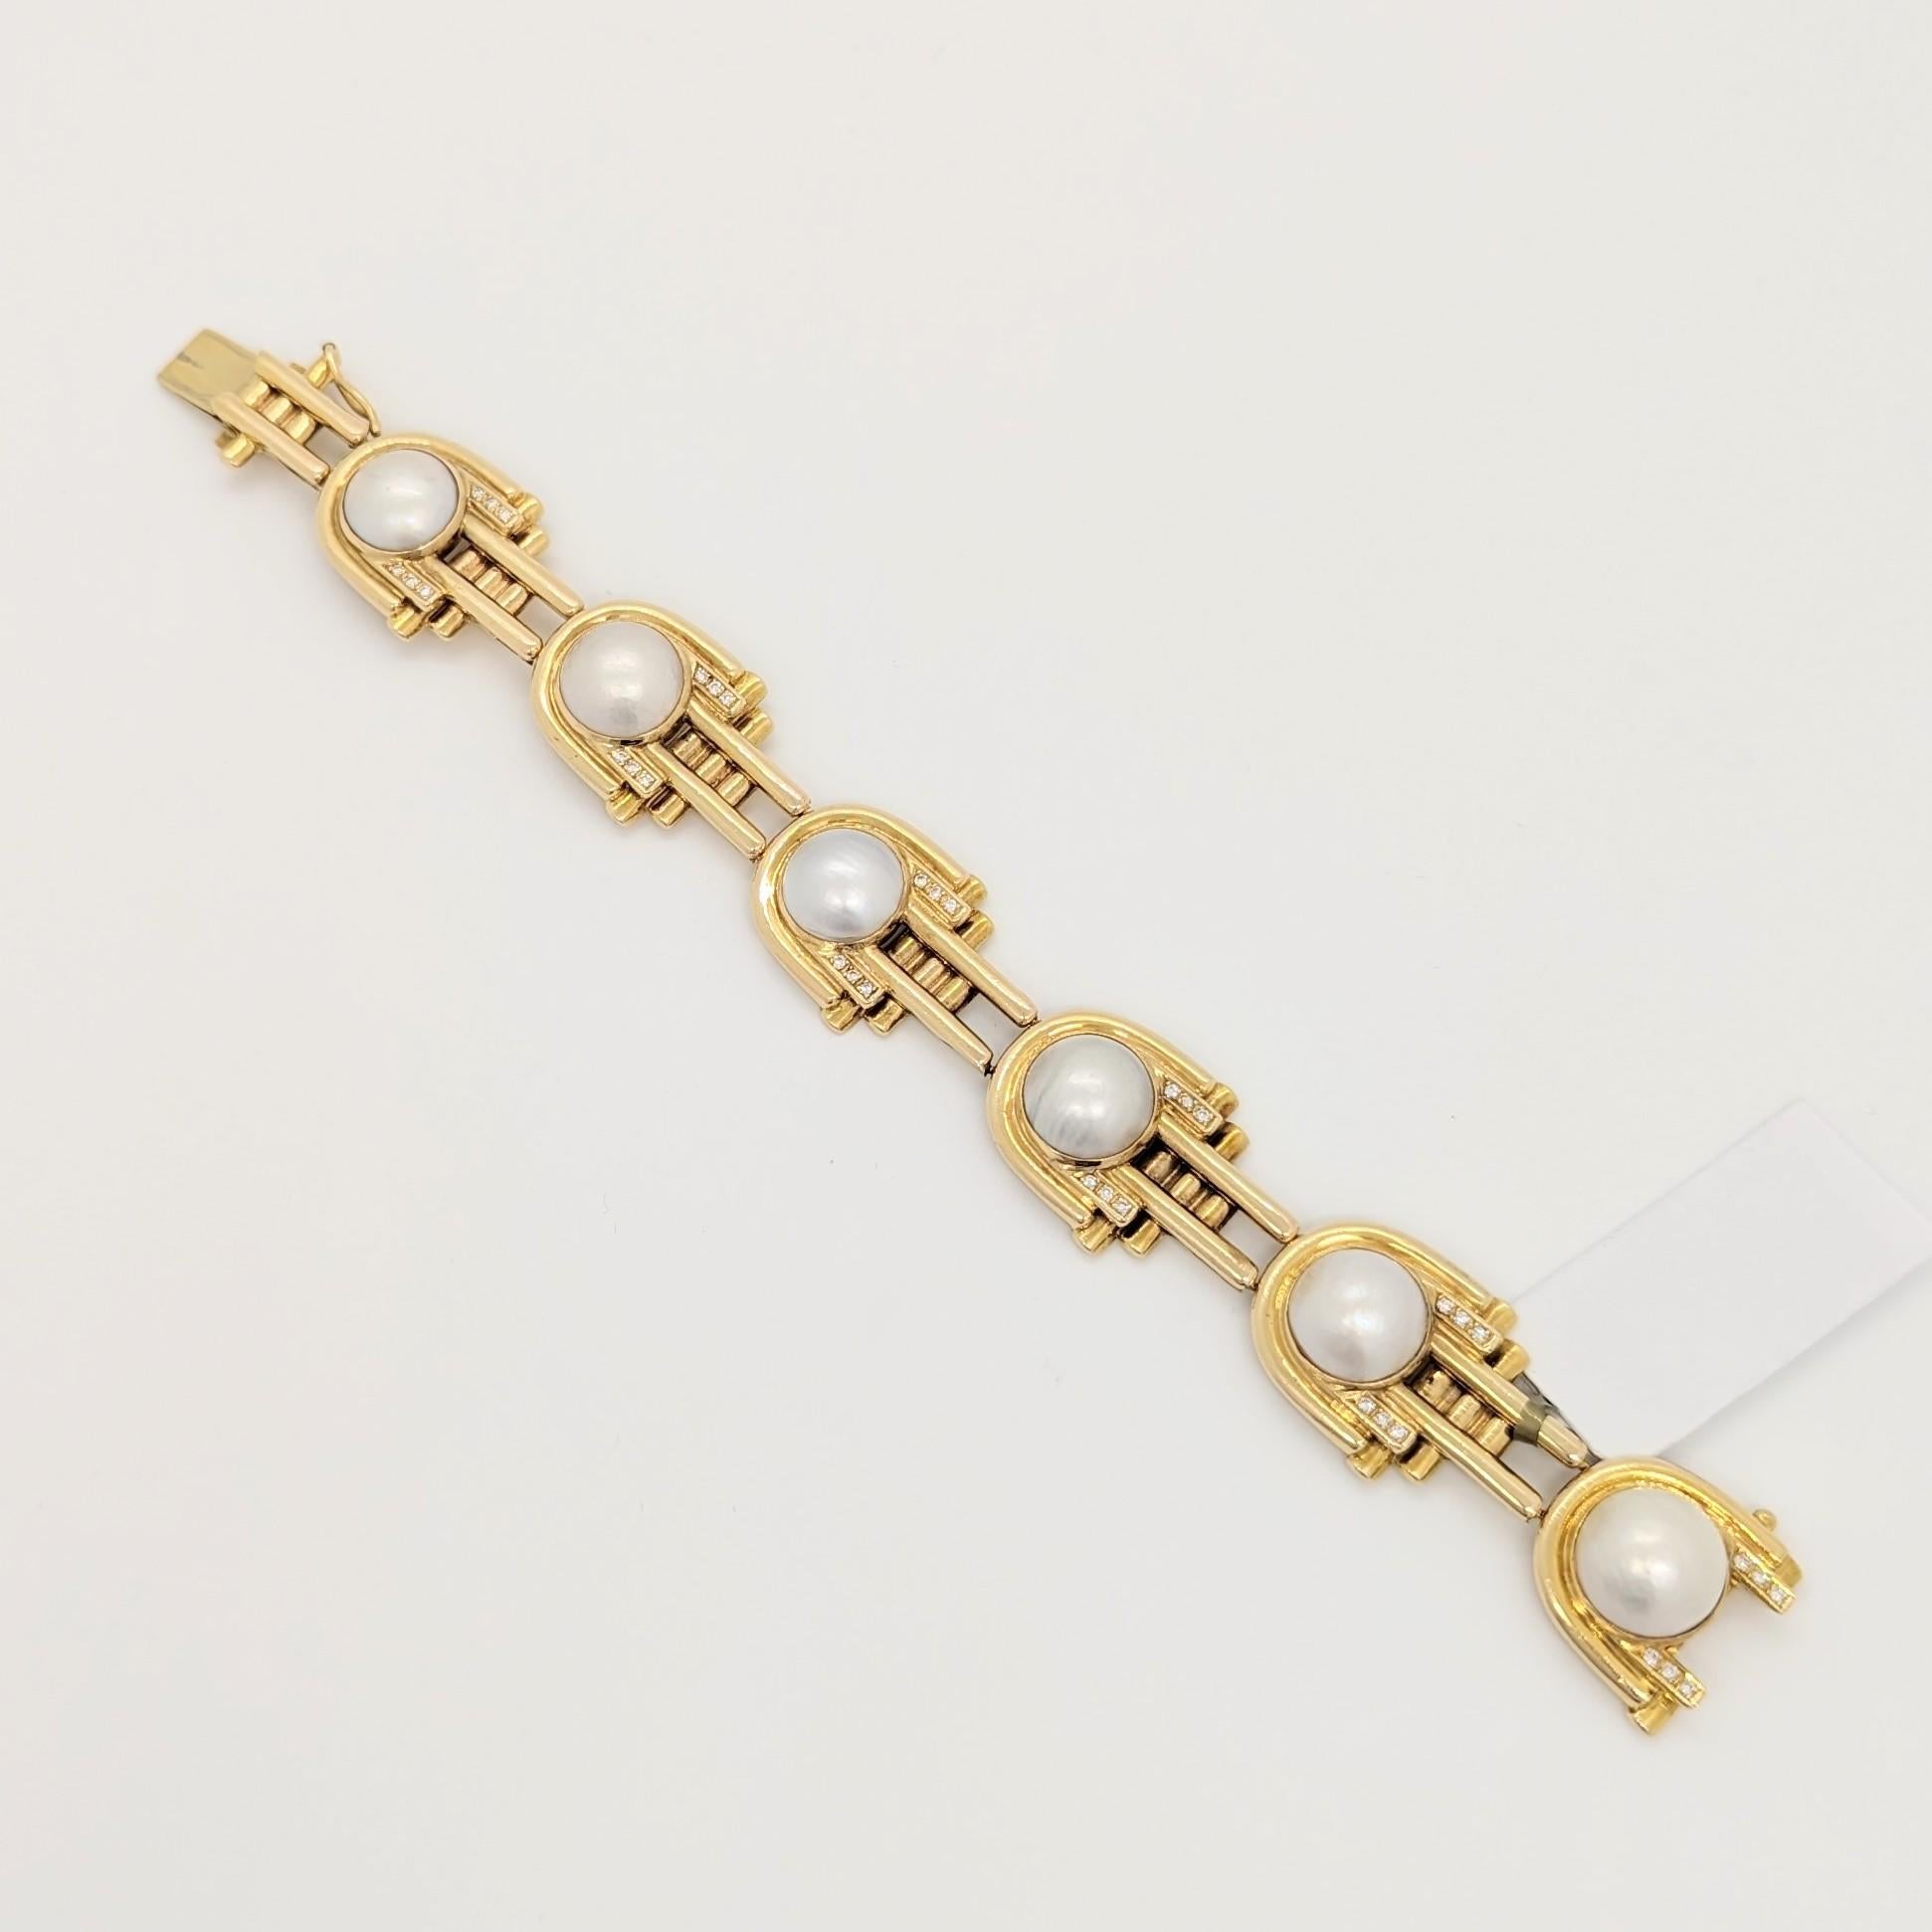 Round Cut White Mabe Pearl and White Diamond Bracelet in 14K Yellow Gold For Sale